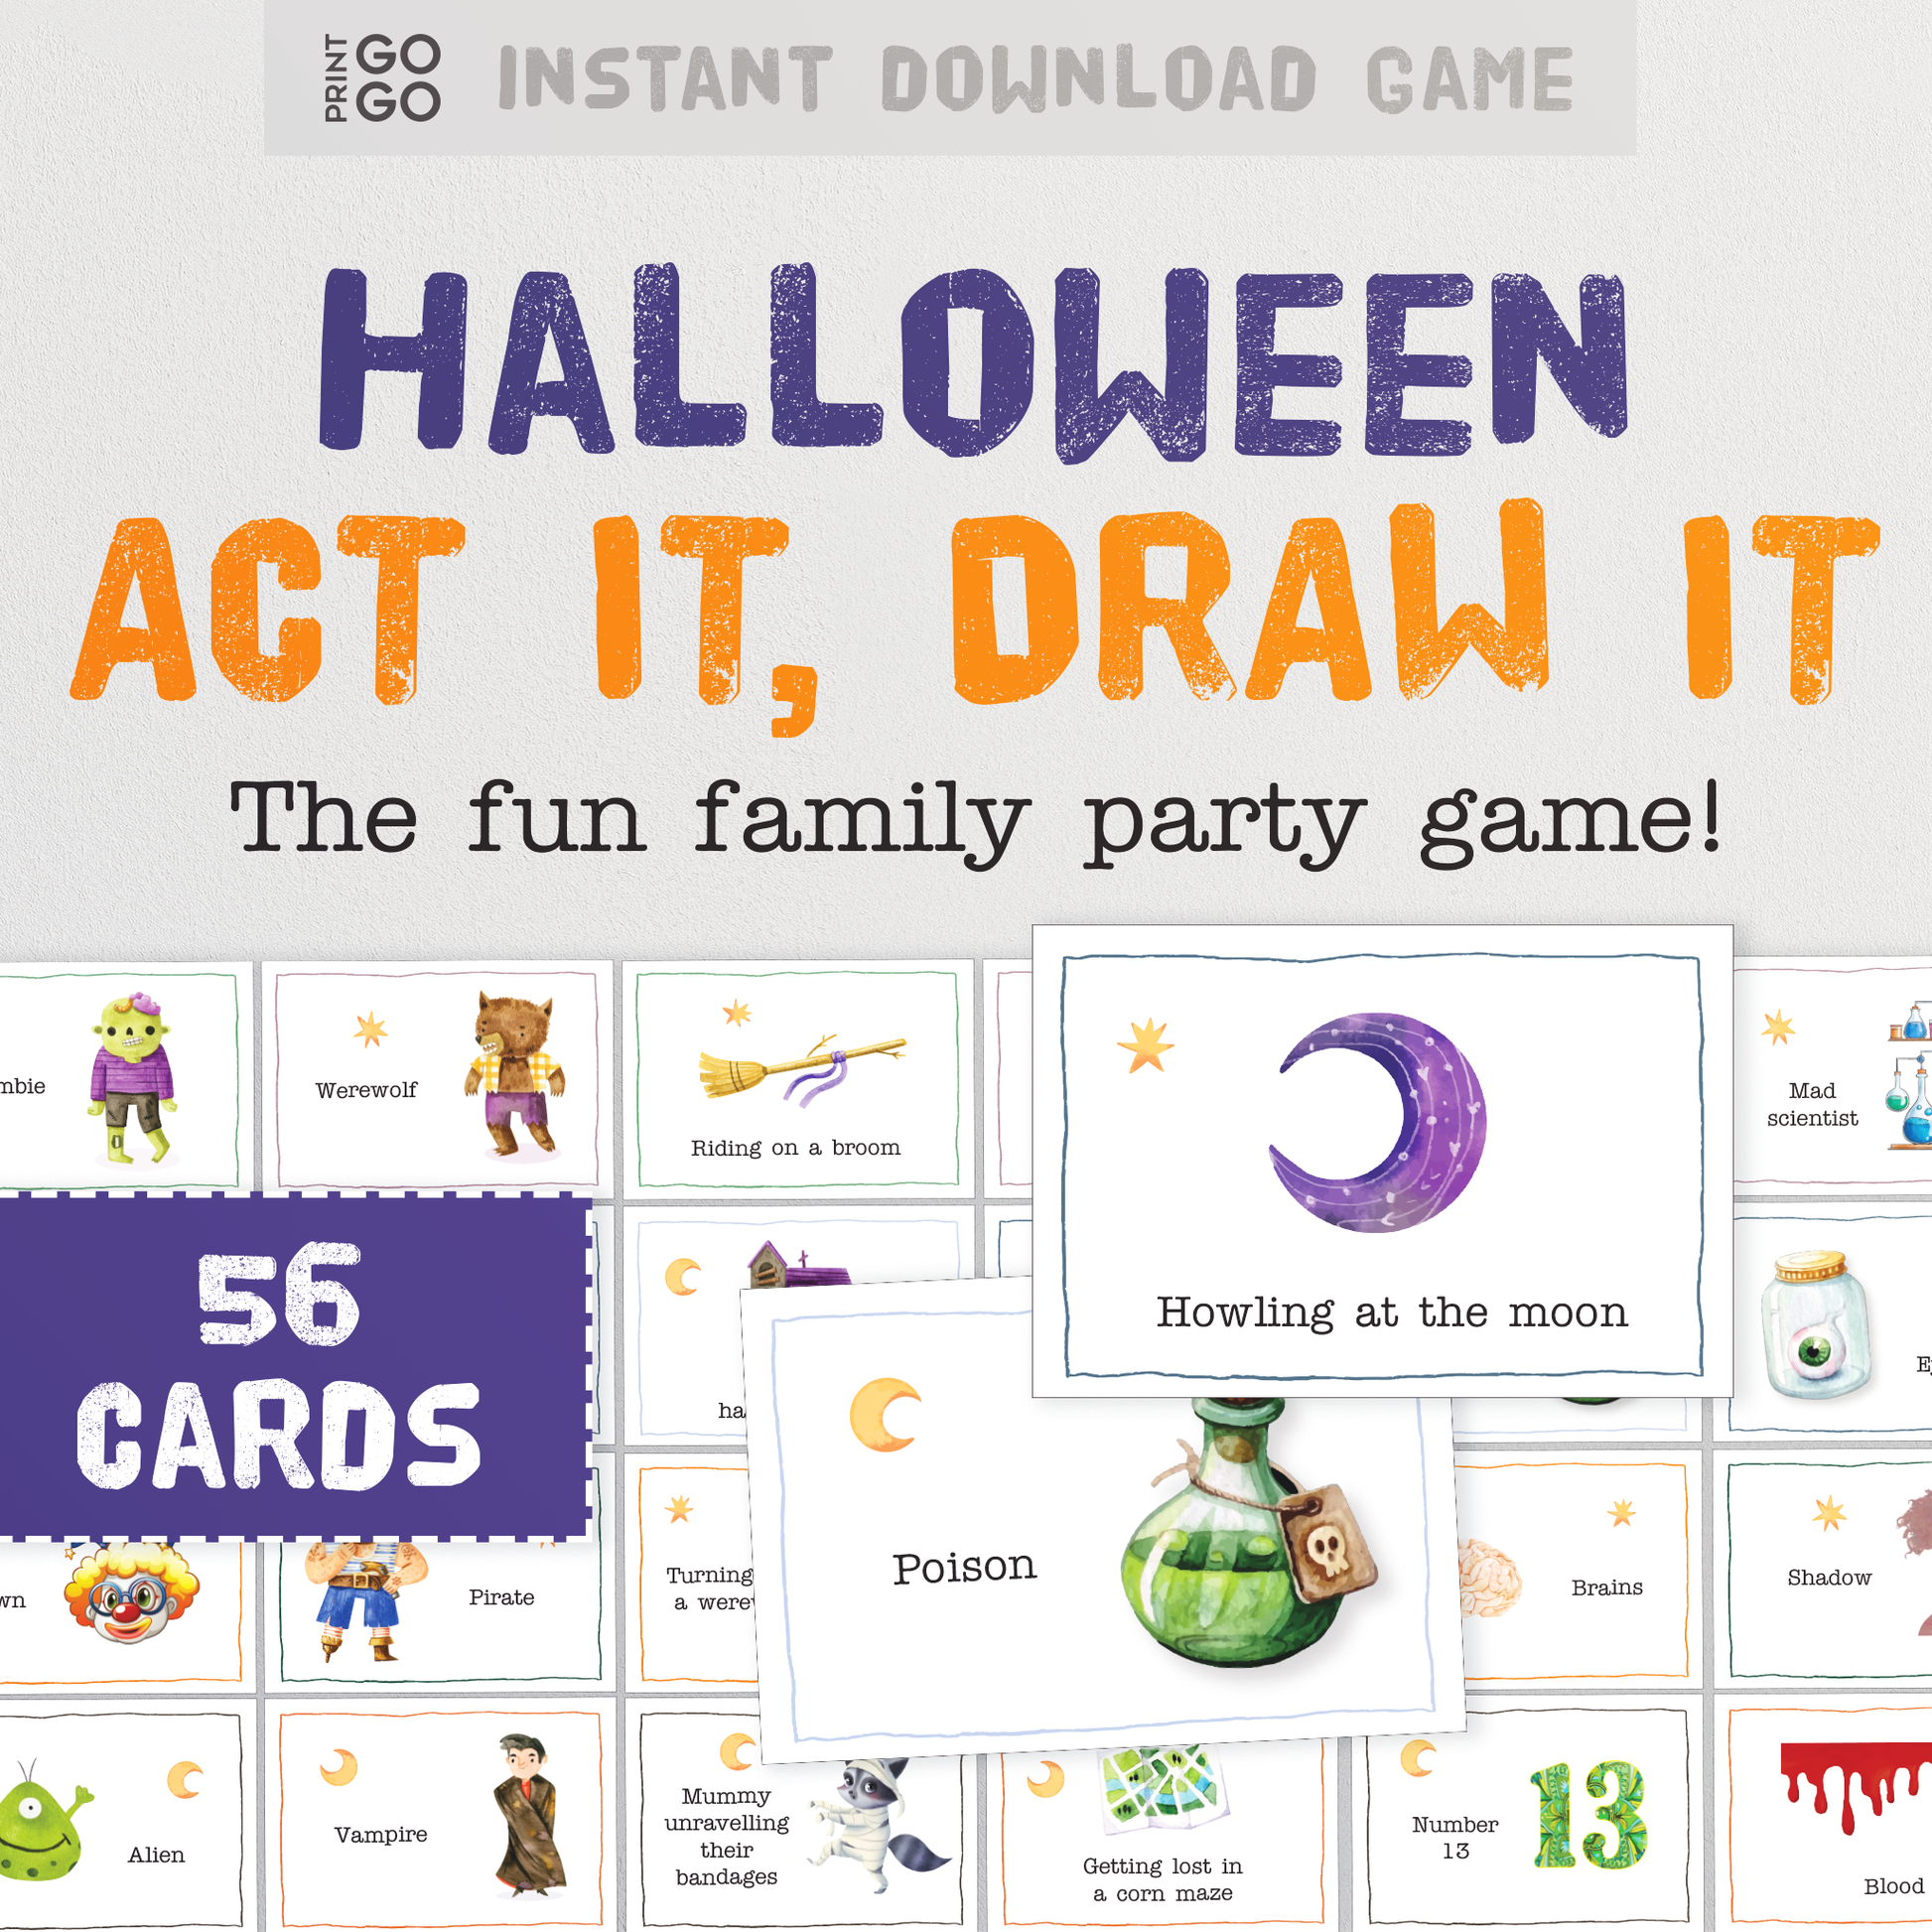 Halloween Act It, Draw It - The Hilarious Family Party Game of Acting Out, Drawing and Guessing Phrases